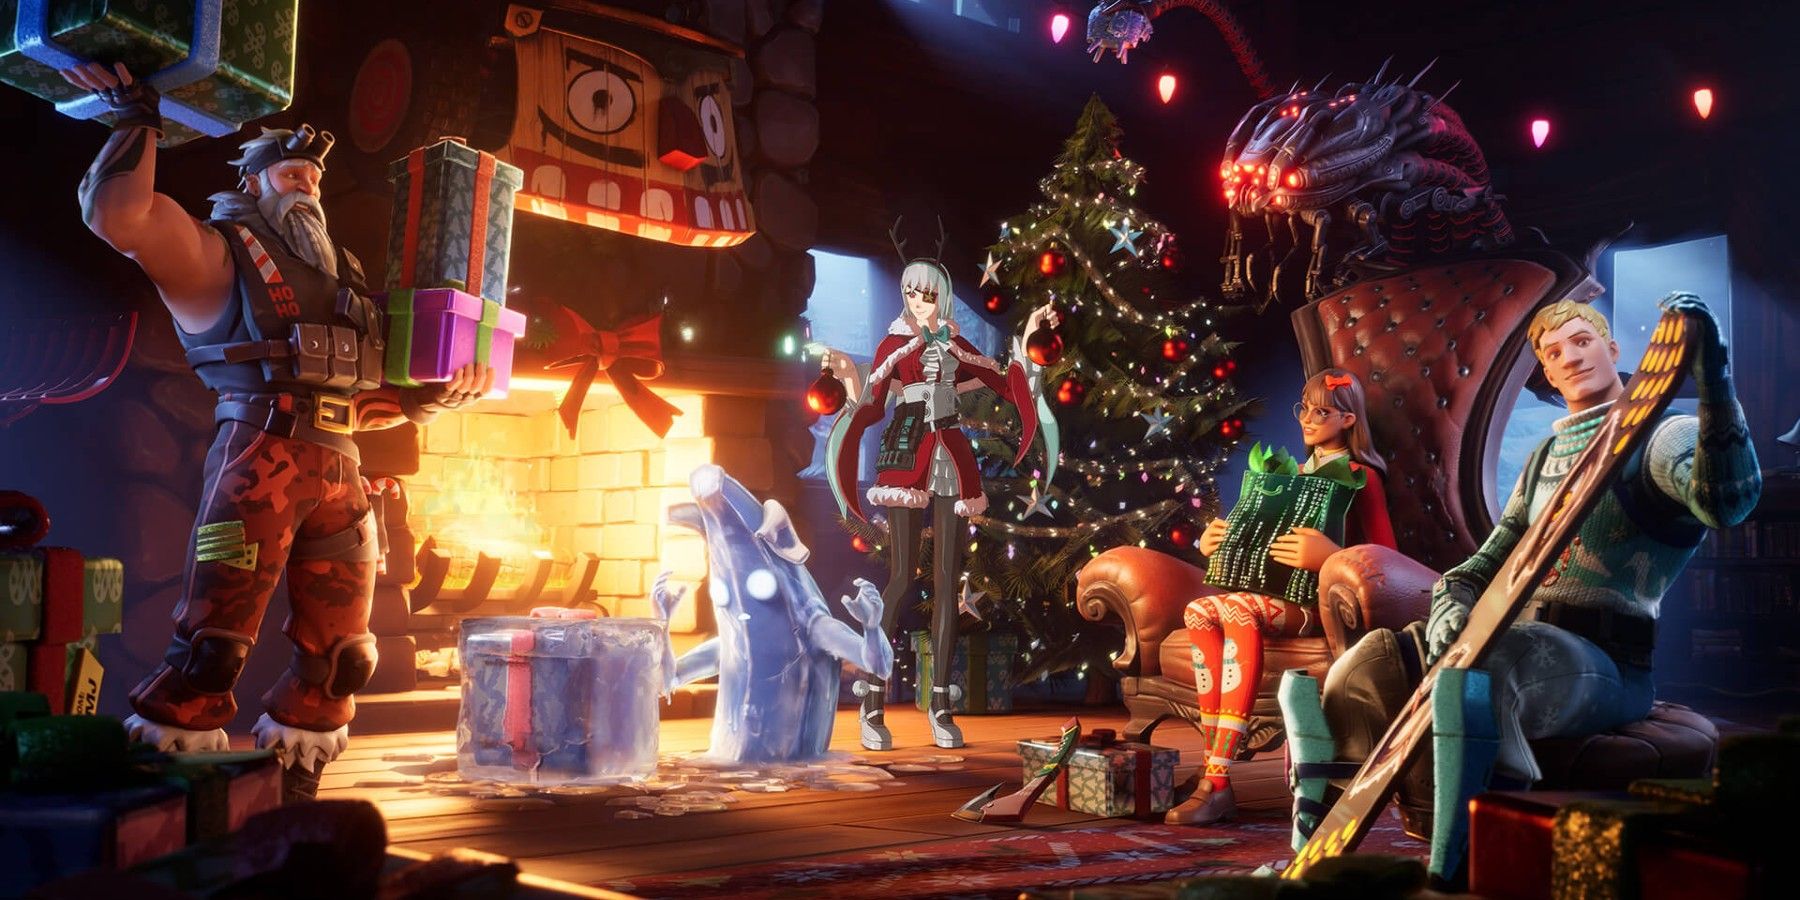 Fortnite Adds Winterfest Content, Including New Spider-Man Skin